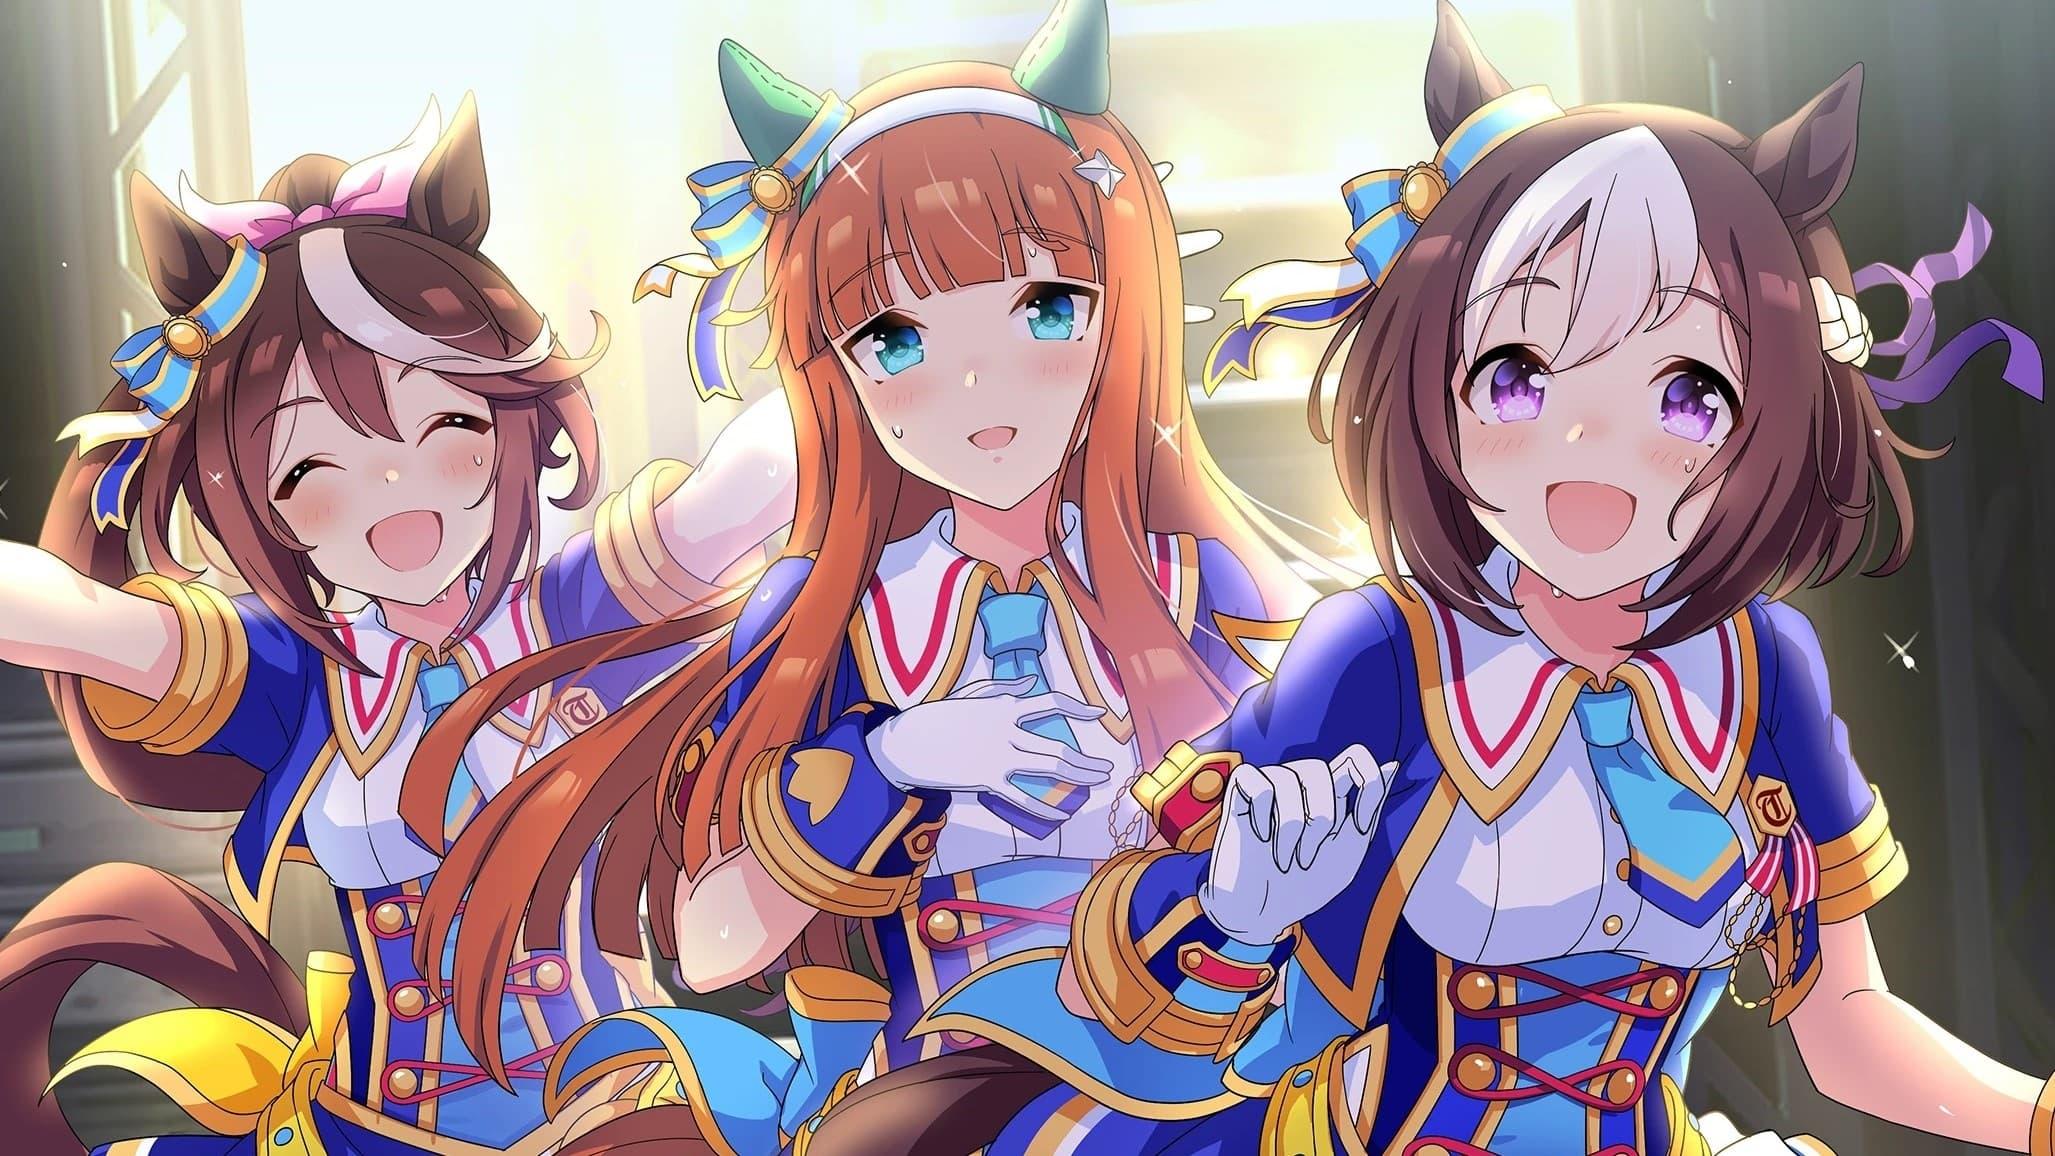 Uma Musume Pretty Derby 3rd EVENT "WINNING DREAM STAGE" backdrop